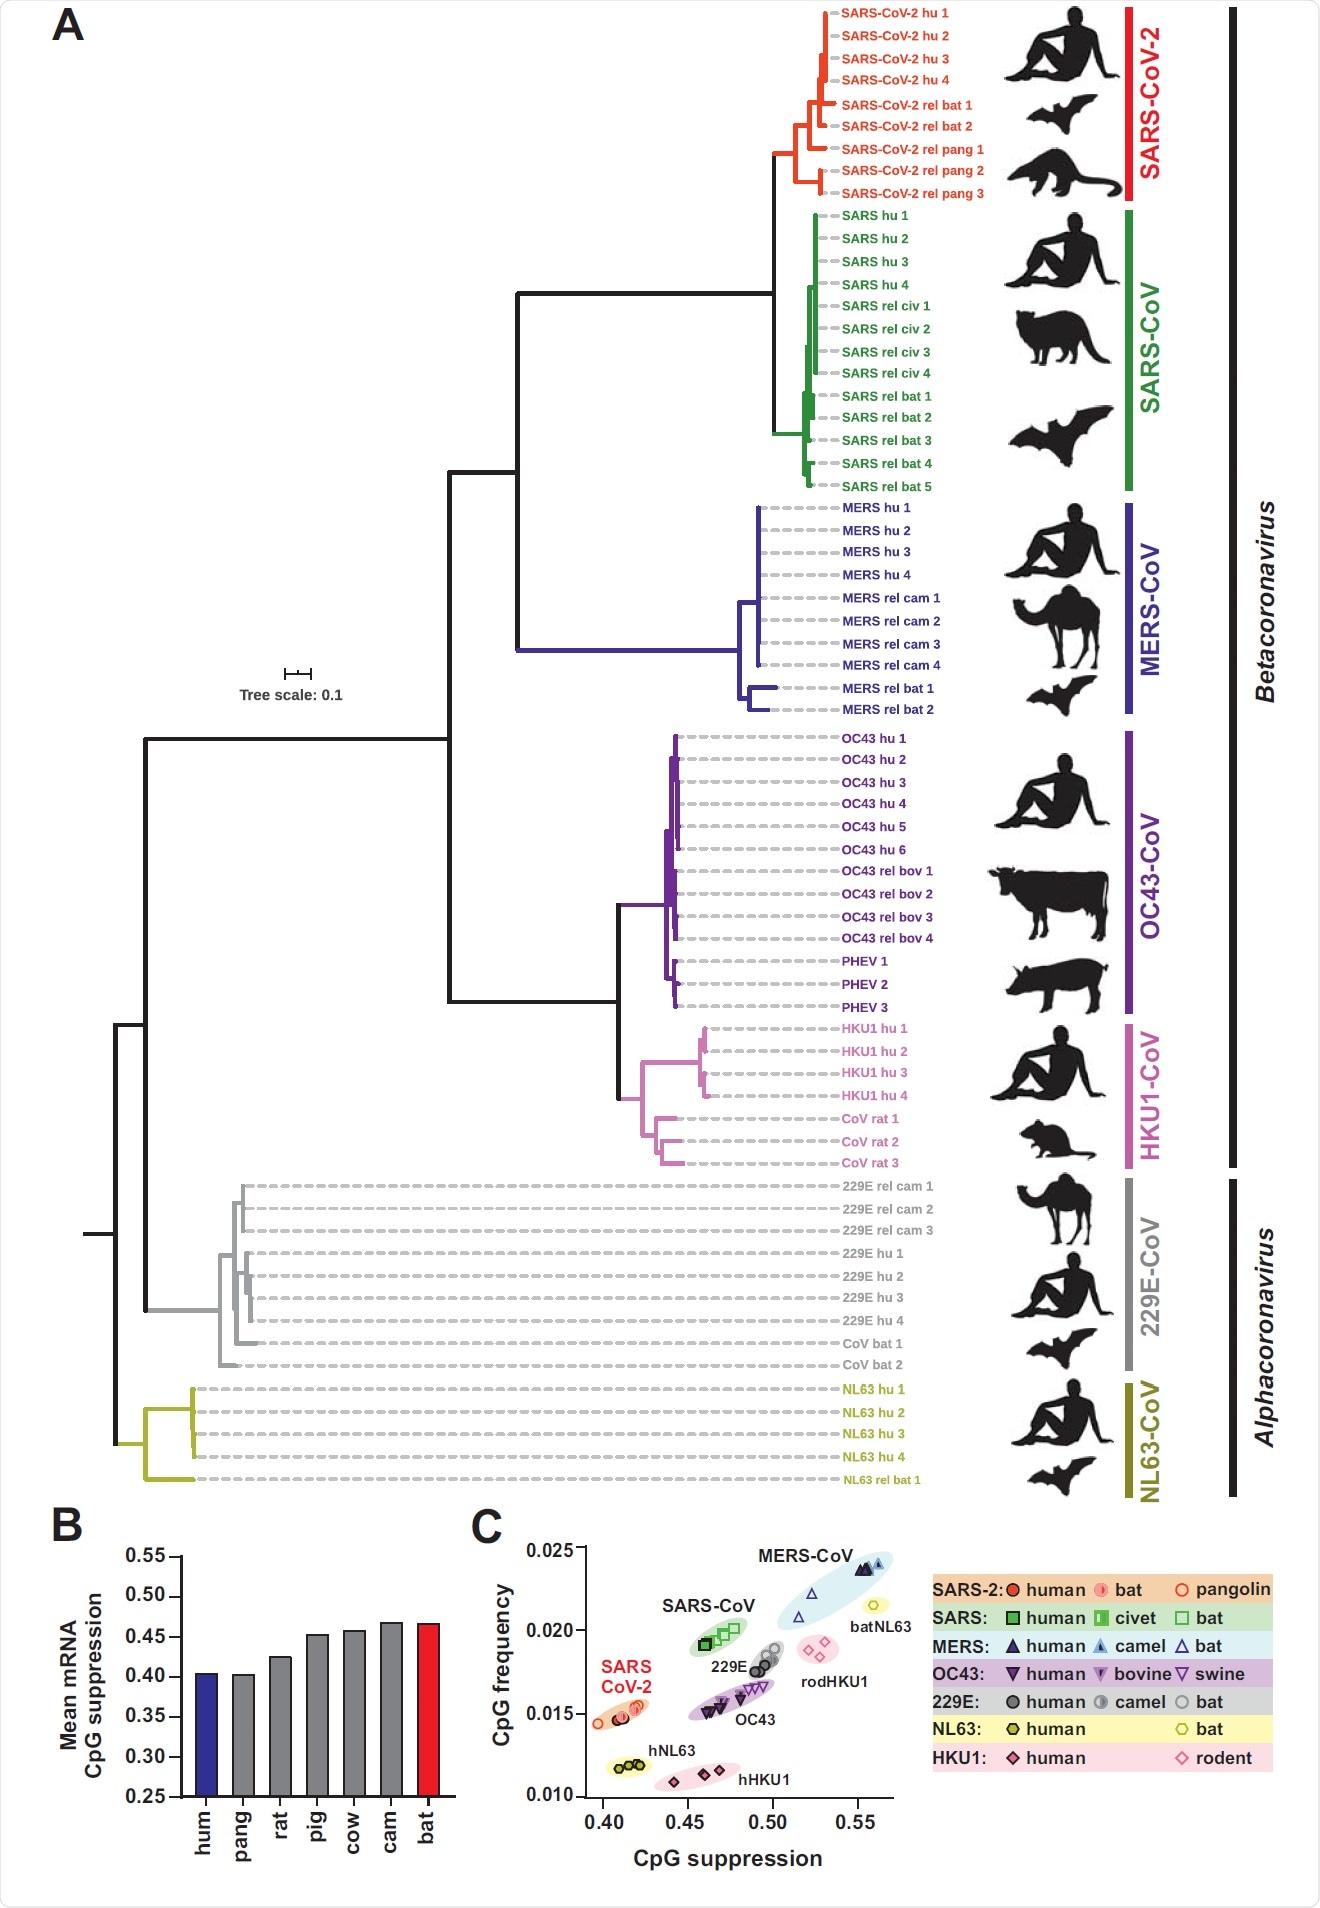 Phylogenetic relationship between human coronaviruses and their animal relatives and CpG suppression in pathogens and their hosts. (A) Distance-based relationship inference based on representative full genome nucleotide sequences of human SARS-CoV-2, SARS, MERS, HKU-1, OC43, NL63 and 229E strains and their closest known animal relatives. Black symbol to the right indicates the viral host (human, bat, pangolin, civet, camel, rat, pig, cattle). (B) Mean CpG suppression (i.e. number of observed CpGs normalized to expected CpGs based on sequence length and GC content) in mRNAs of the indicated host species (human, pangolin, rat, pig, cow, camel and bat). (C) CpG frequency (no. of CpGs normalized to sequence nucleotide length) and suppression (no. of observed CpGs normalized to expected CpGs based on sequence length and GC content) in human coronavirus genomes and their closest animal-infecting relatives. See also Table S1.